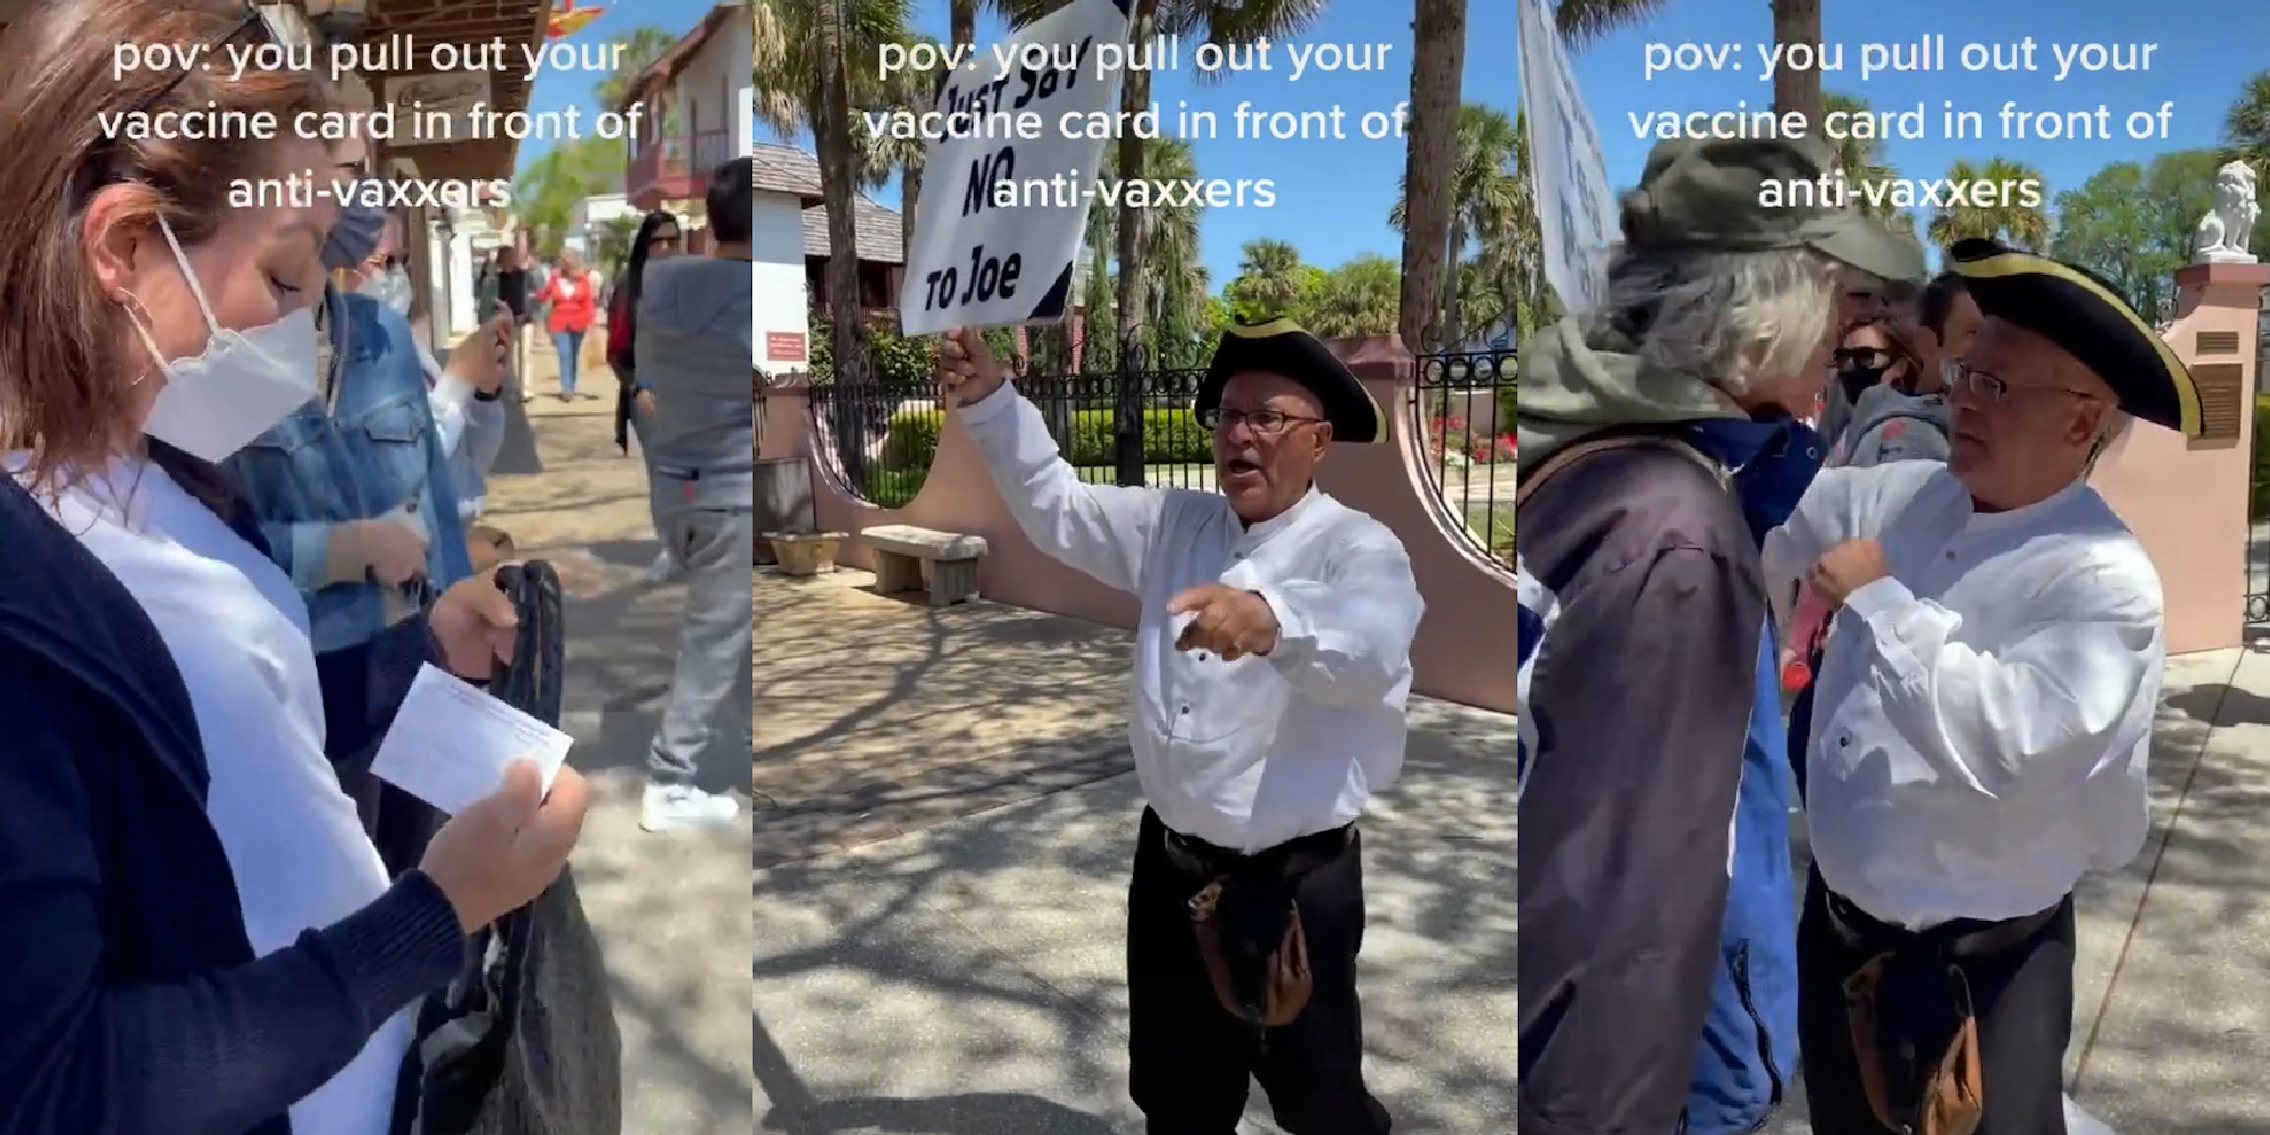 woman holding vaccine card (l) tea party man dressed as a colonist holding 'just say no to joe' sign pointing (c) man blocking colonist (r)